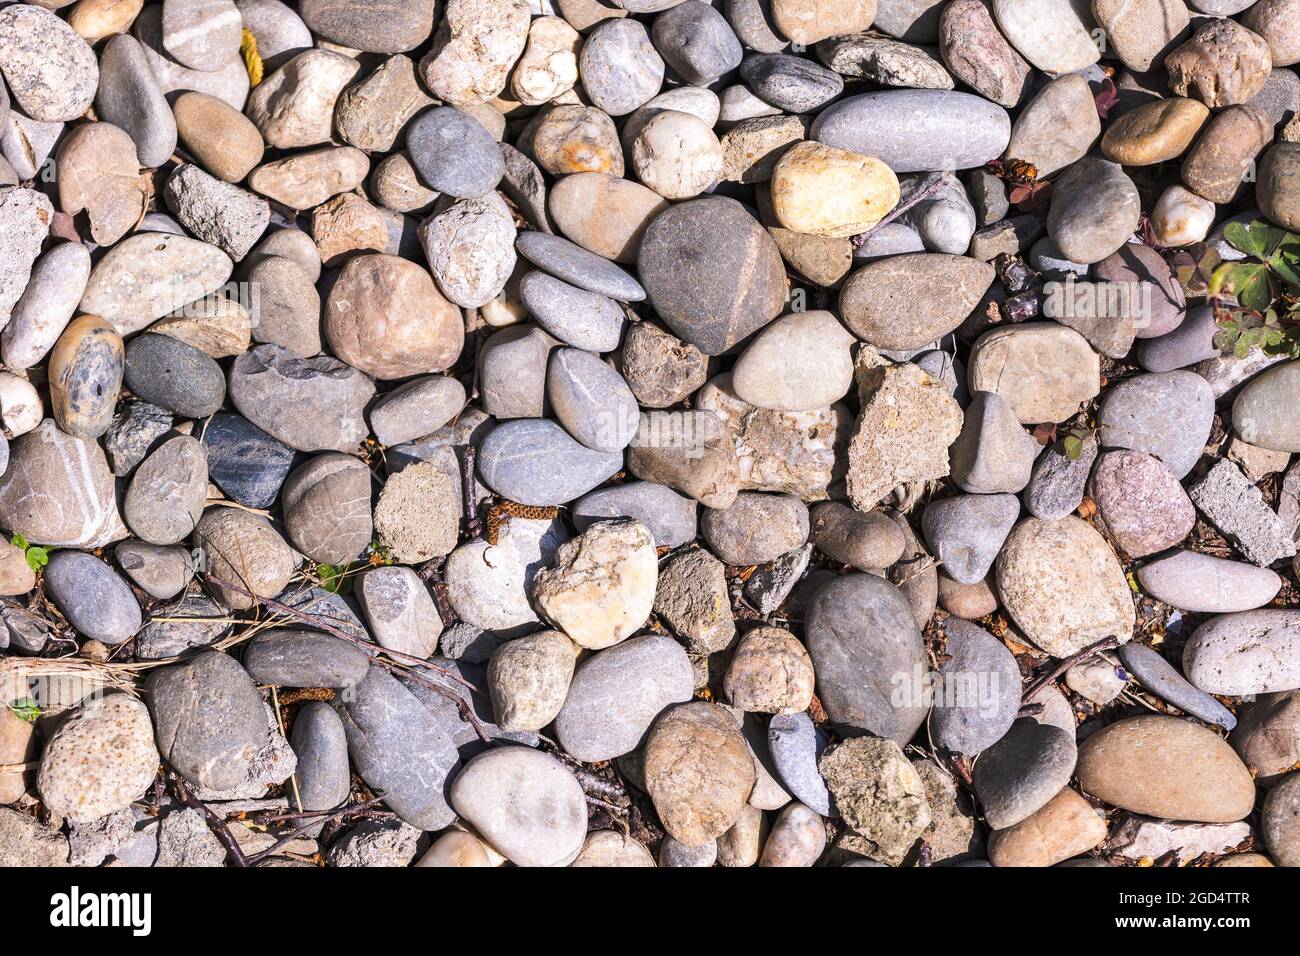 A texture portrait of pea gravel, which are small rocks of